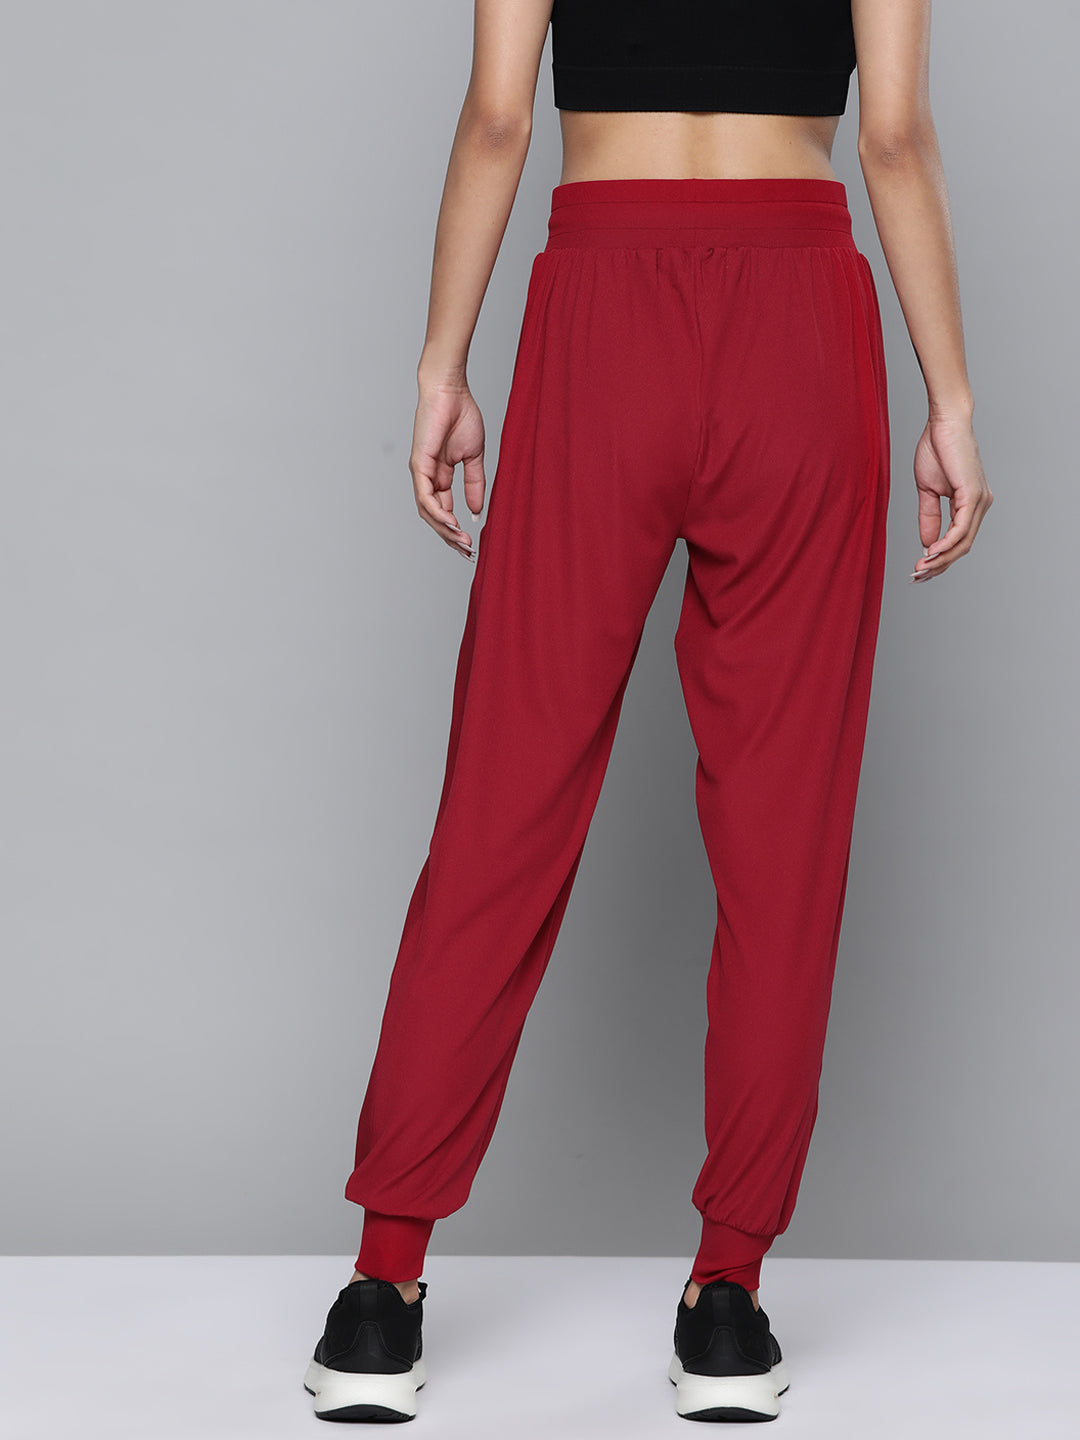 NEW Women Small Maroon Jogger Athletic Gym Fitness Yoga Pants